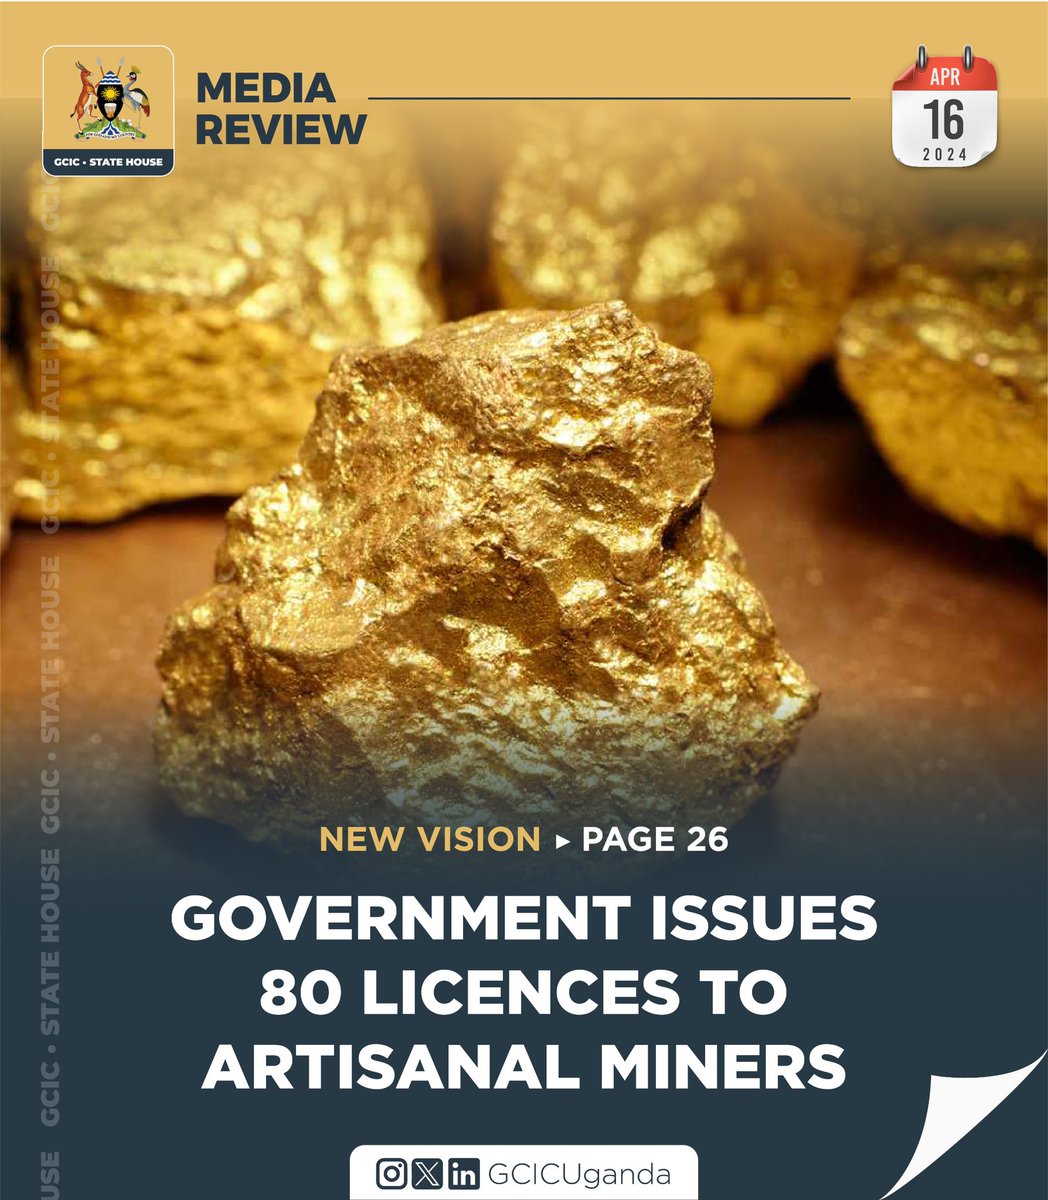 @GovUganda issues 80 licences to artisanal miners
#UgMoving4wd

@goldenglobes @GolfChannel 
@FabrizioRomano @Lucy_Worsley 
@elonmusk @POTUS 
#Arsenal #cryptocrash #Lorch #adventurous #BitcoinHalving